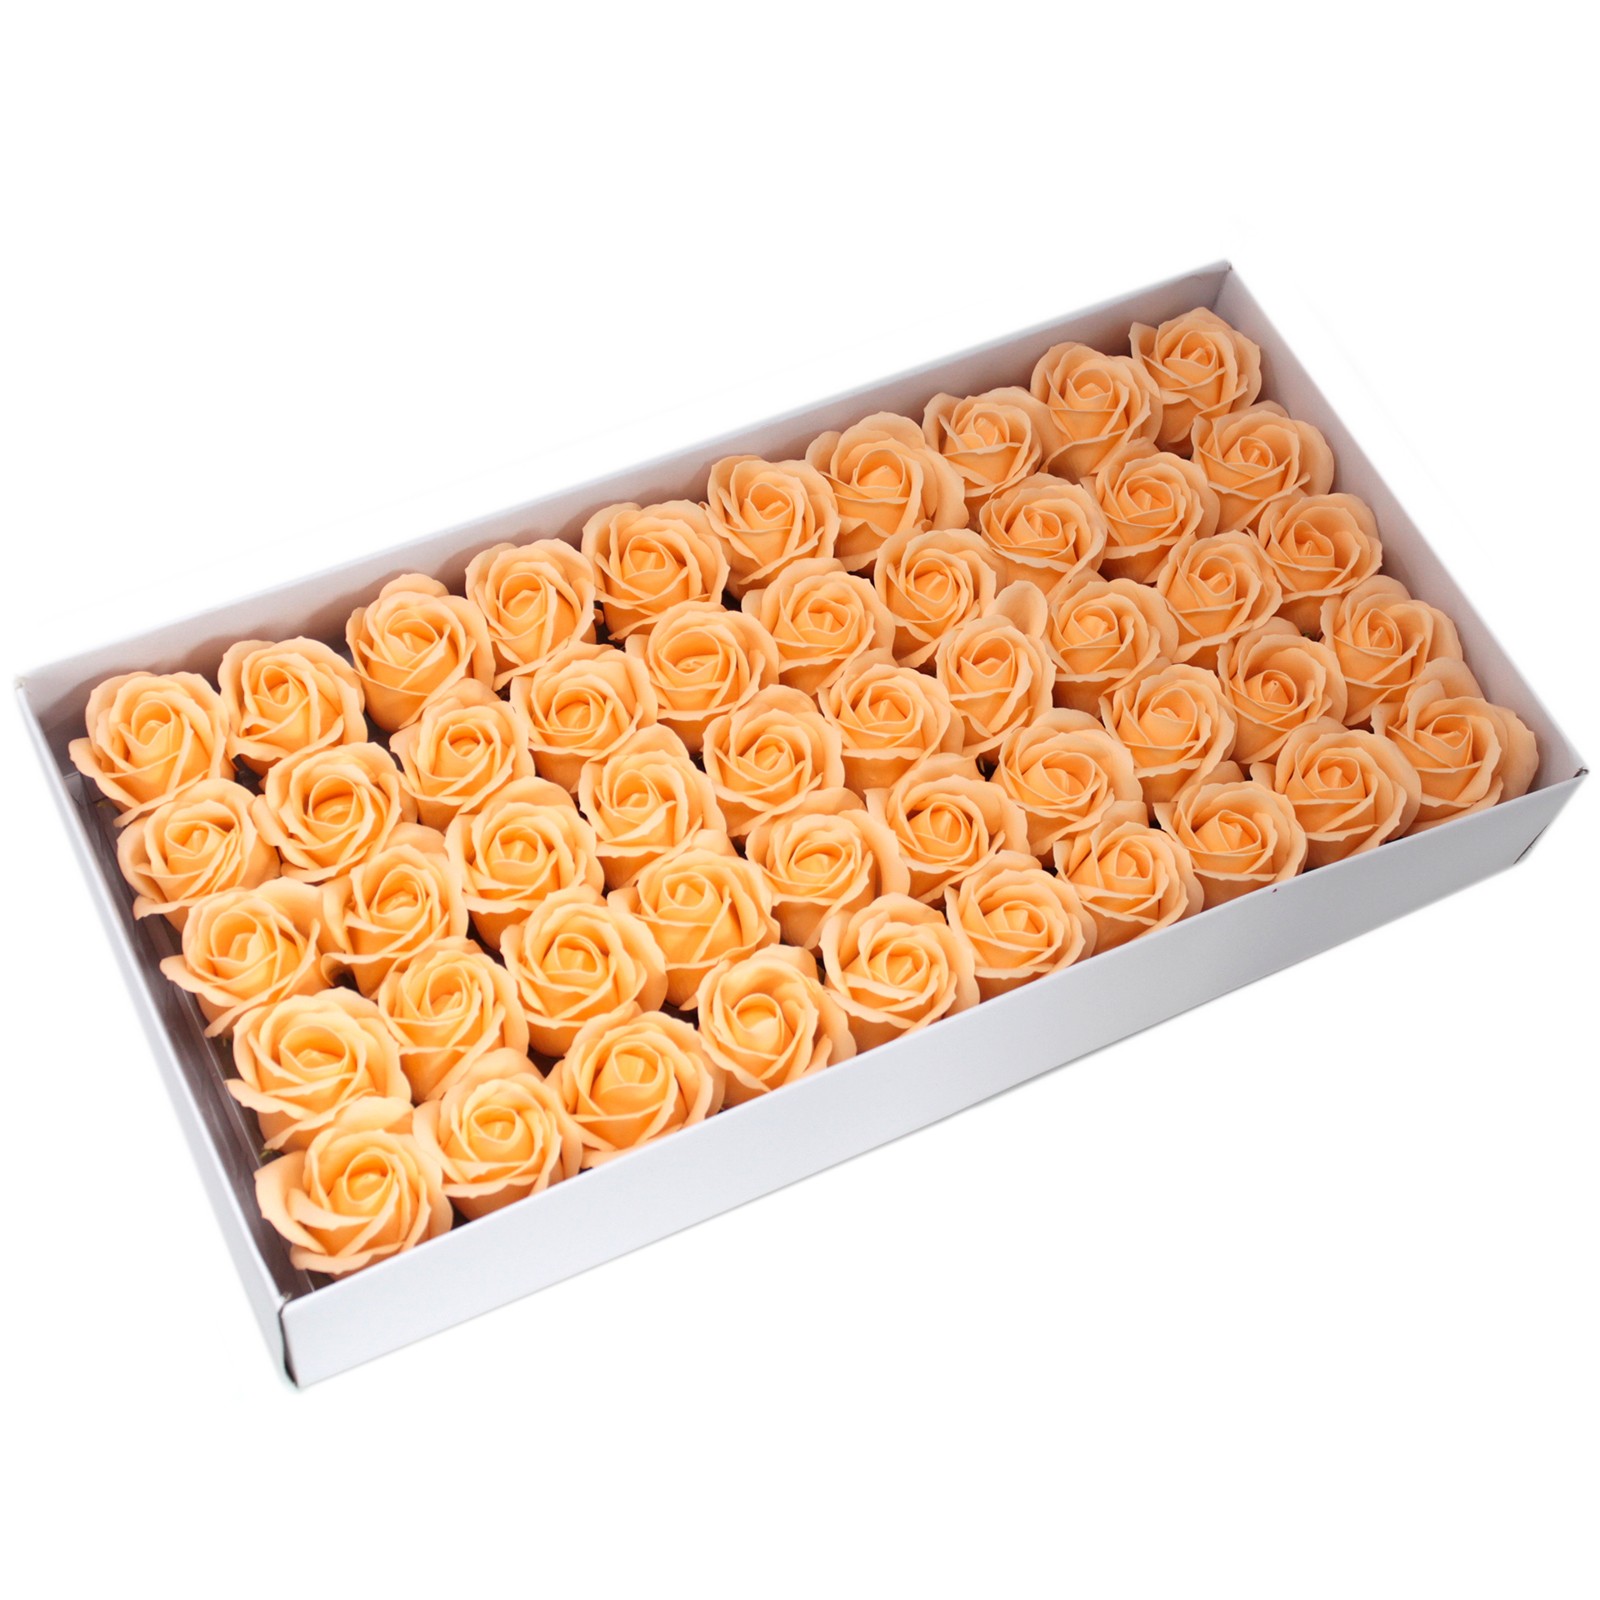 10 x Craft Soap Flowers - Med Rose - Peach - Click Image to Close